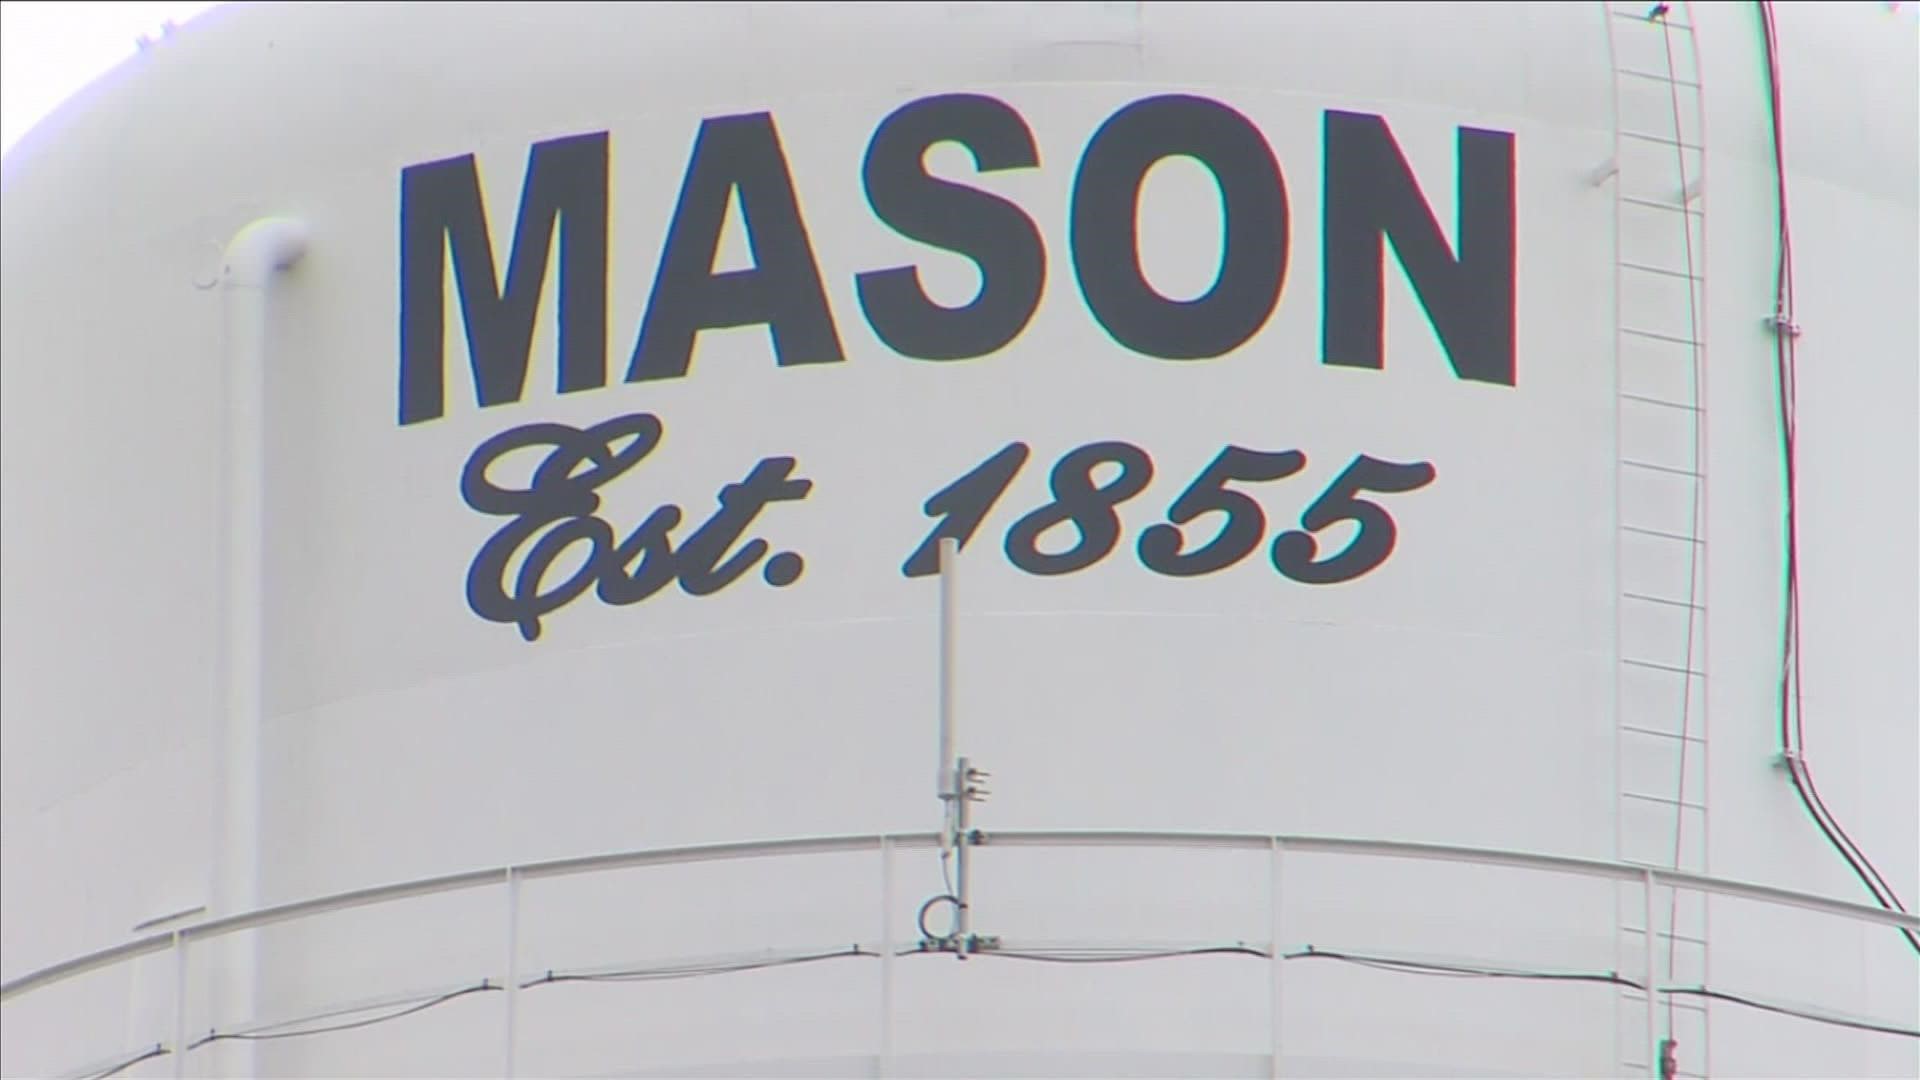 Mason's mayor and Board of Alderman asked for a temporary injunction to stop the takeover, but a judge denied that request on Thursday.